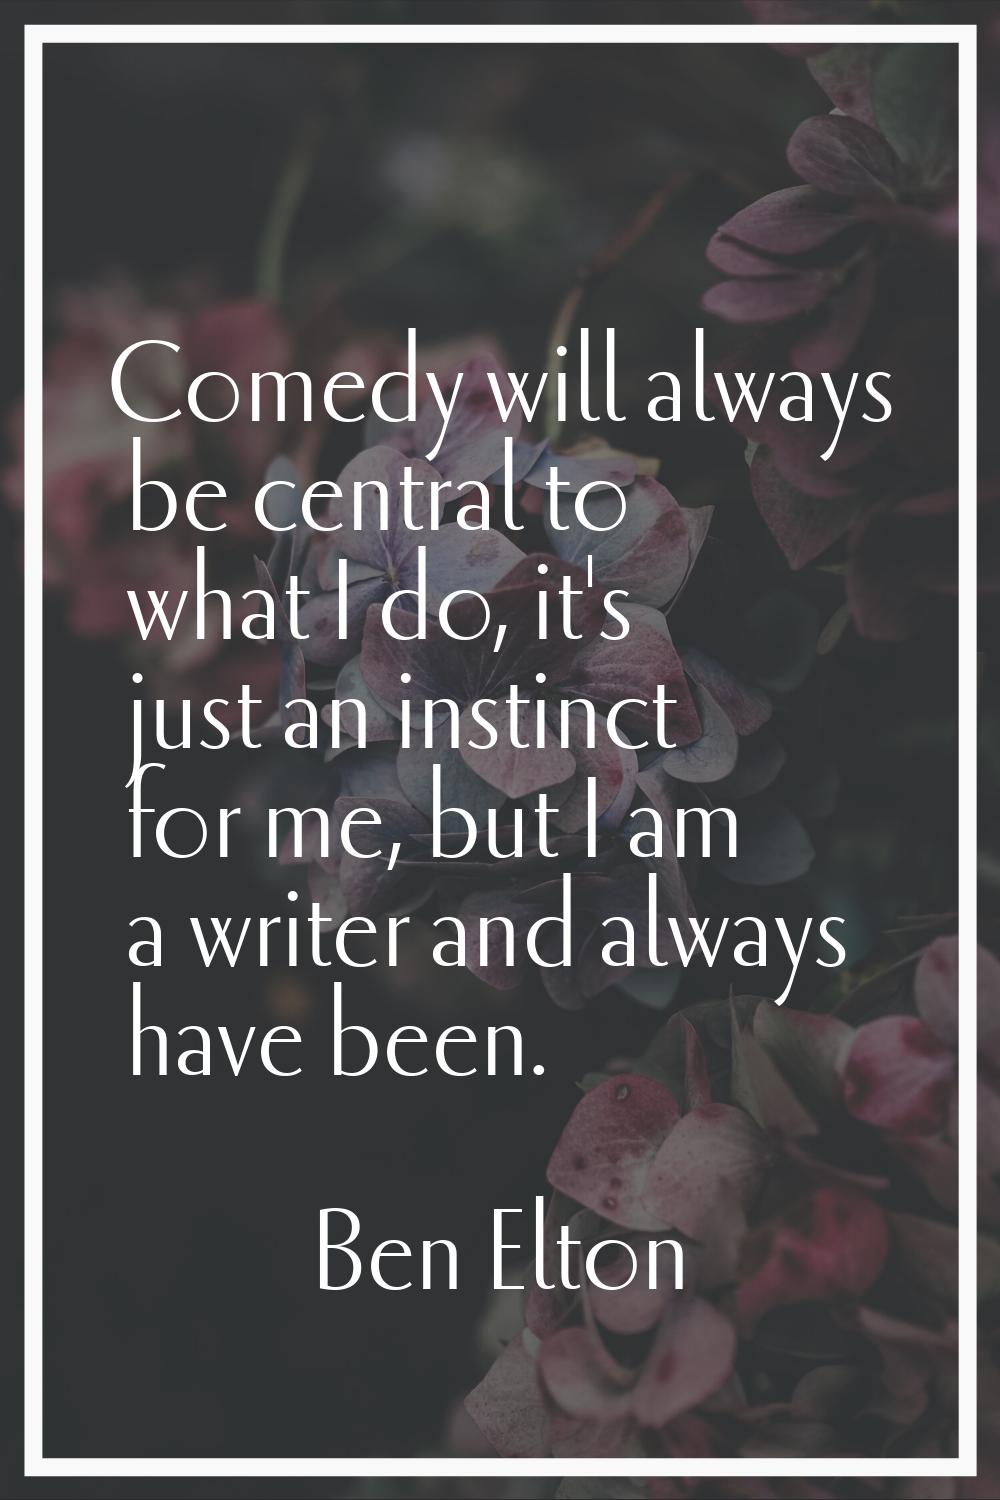 Comedy will always be central to what I do, it's just an instinct for me, but I am a writer and alw